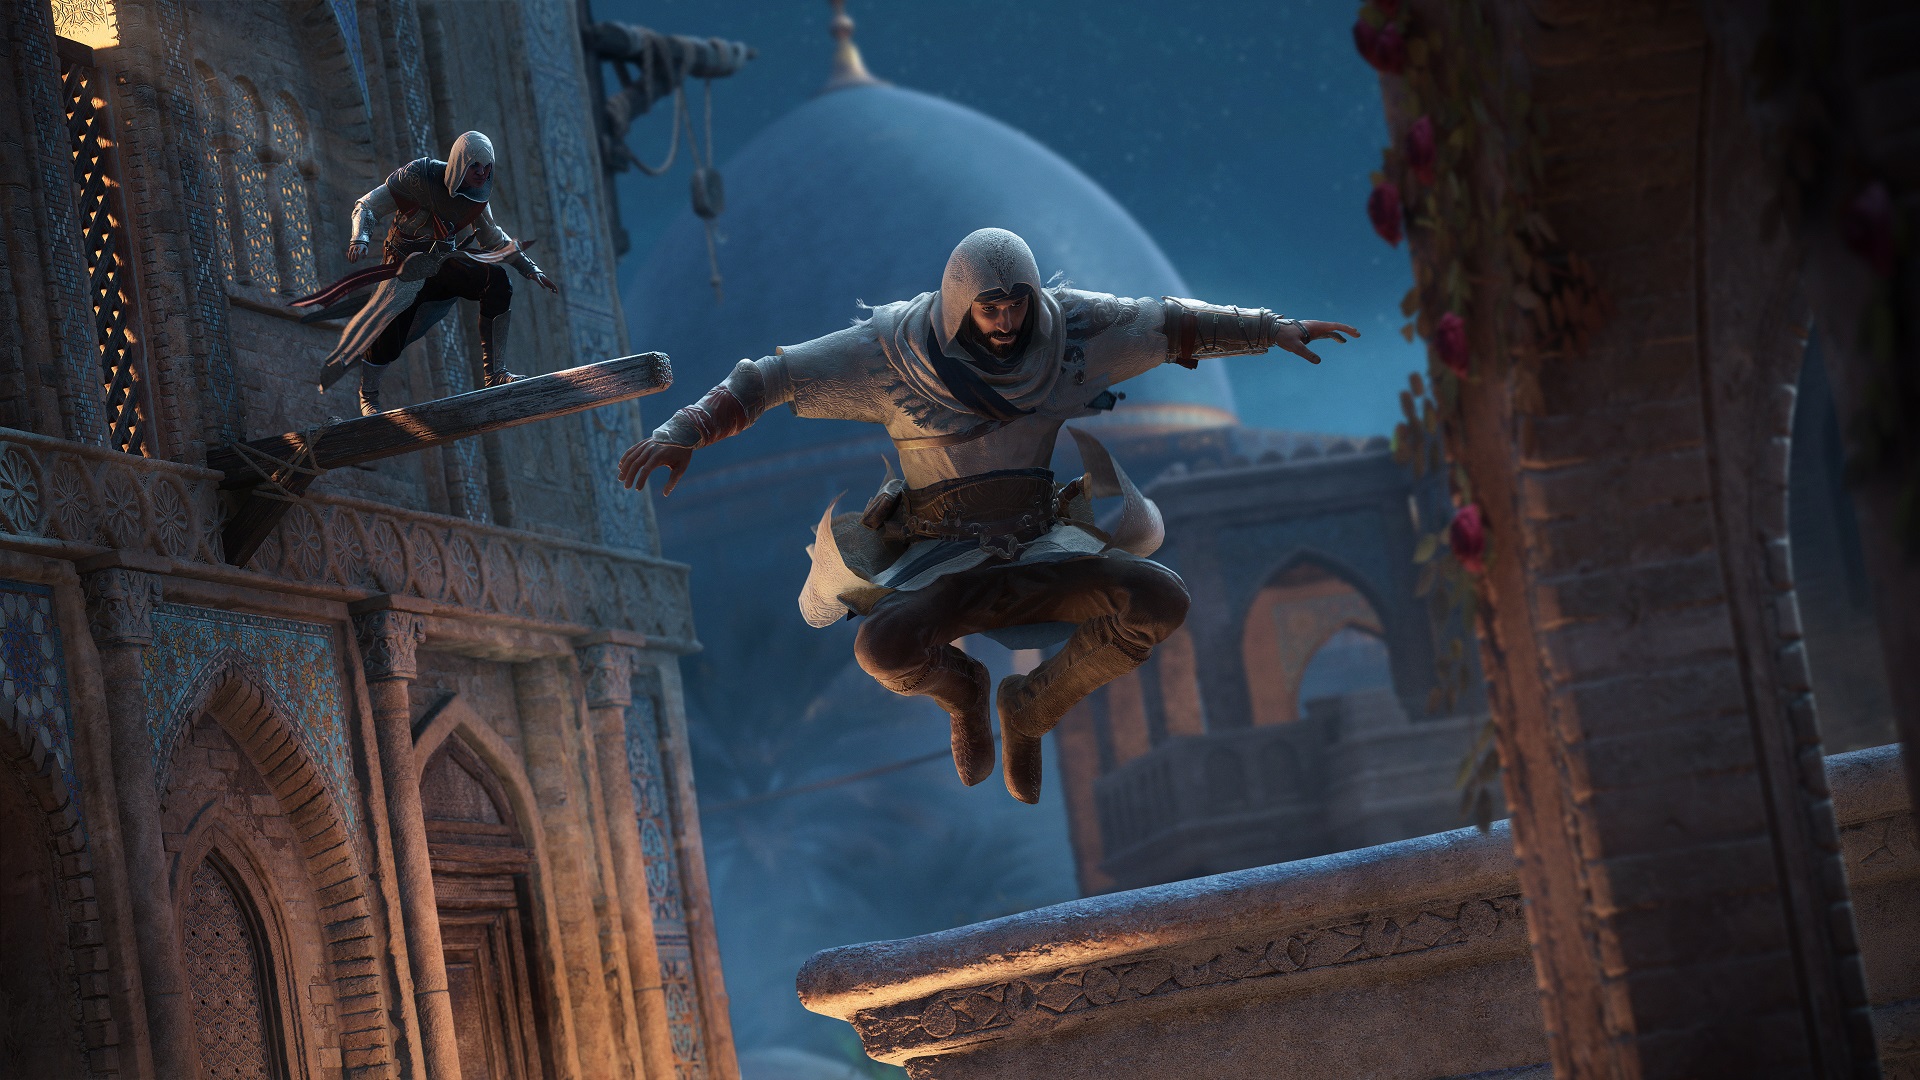 Assassin's Creed: Valhalla' delivers gameplay reveal and release date